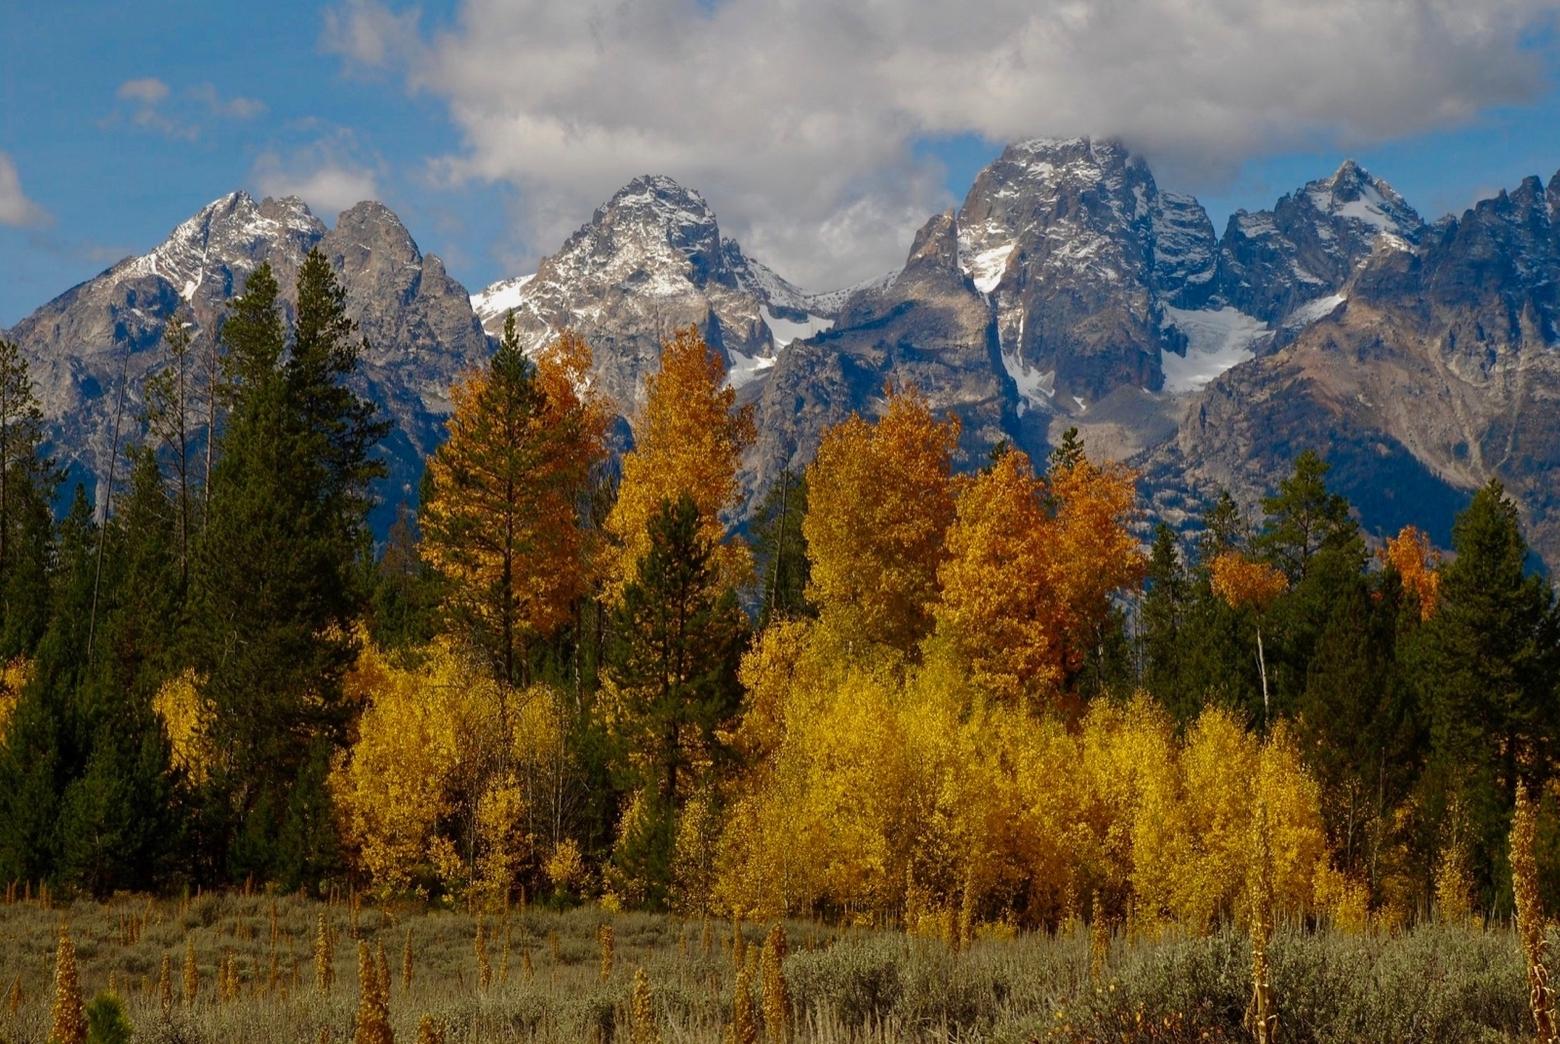 Autumn in the Tetons.  Photo by Susan Marsh